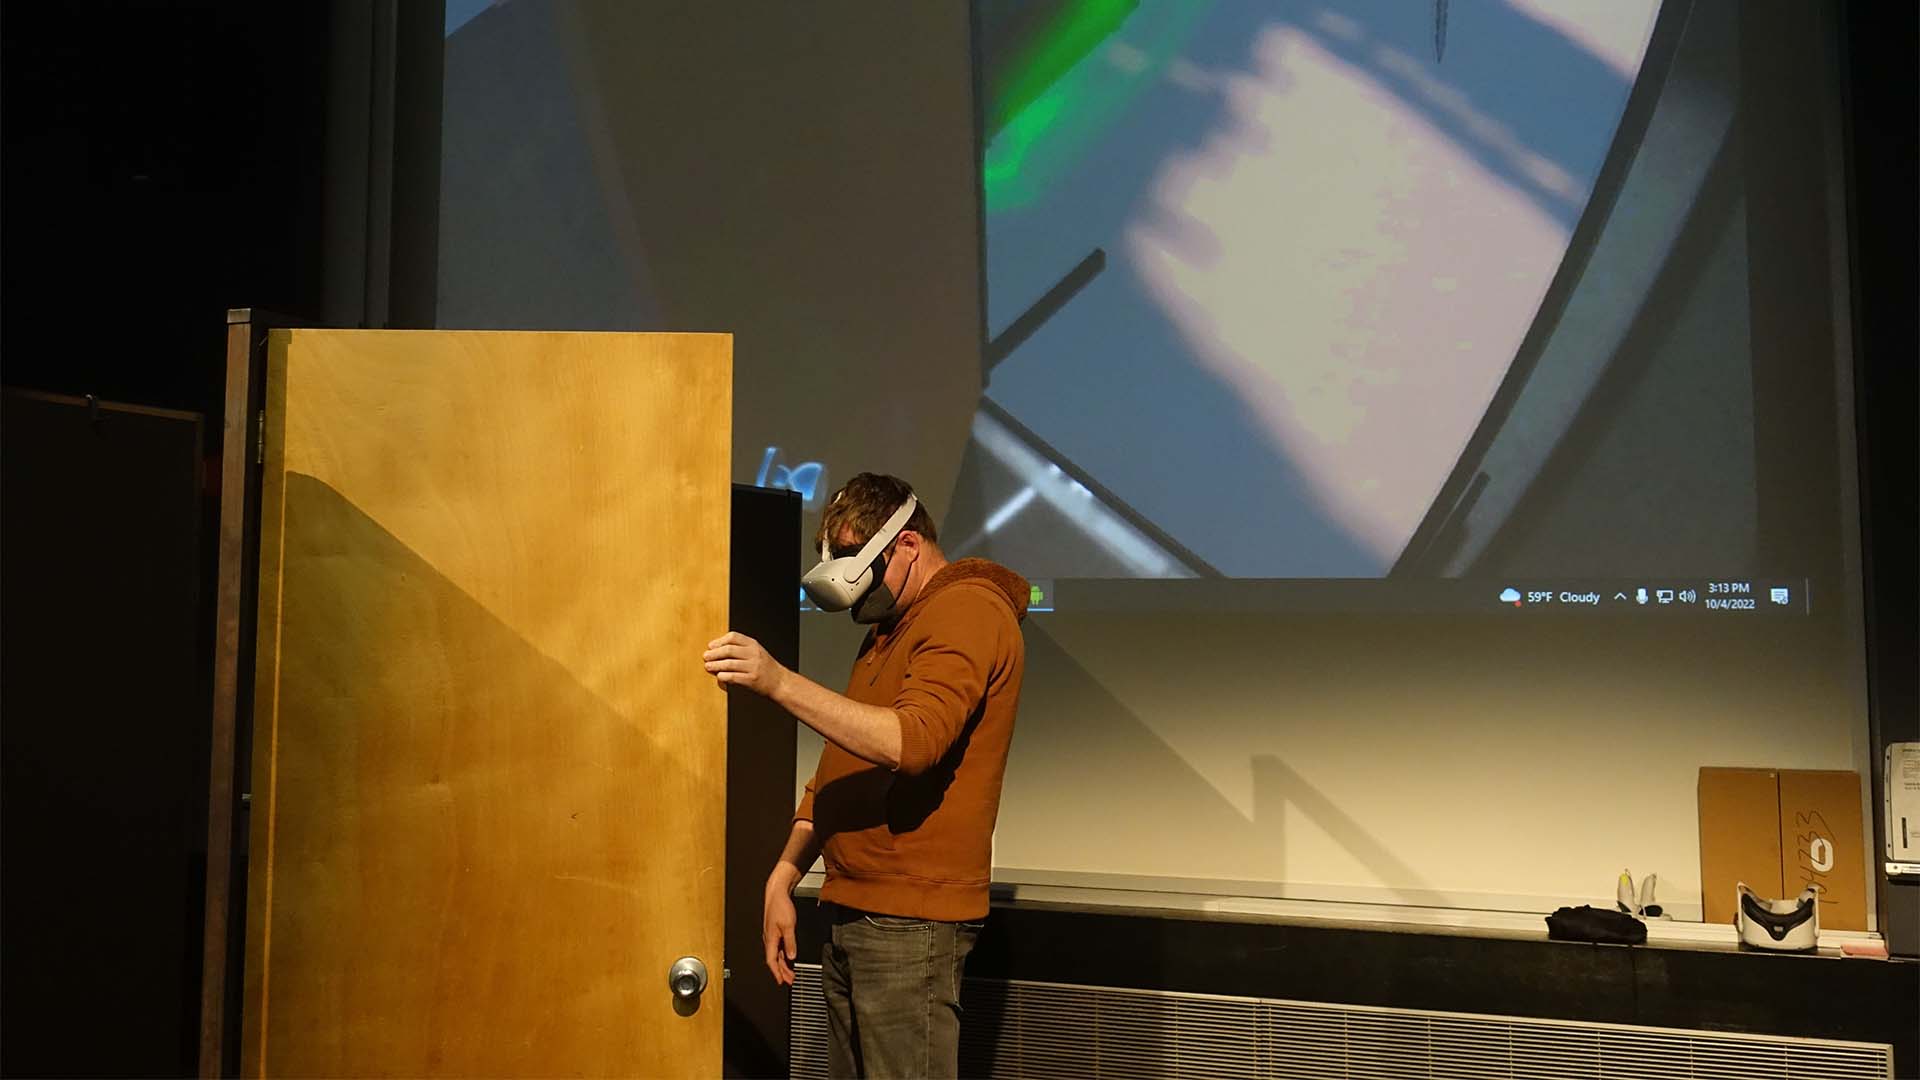 A player interacting with the real door